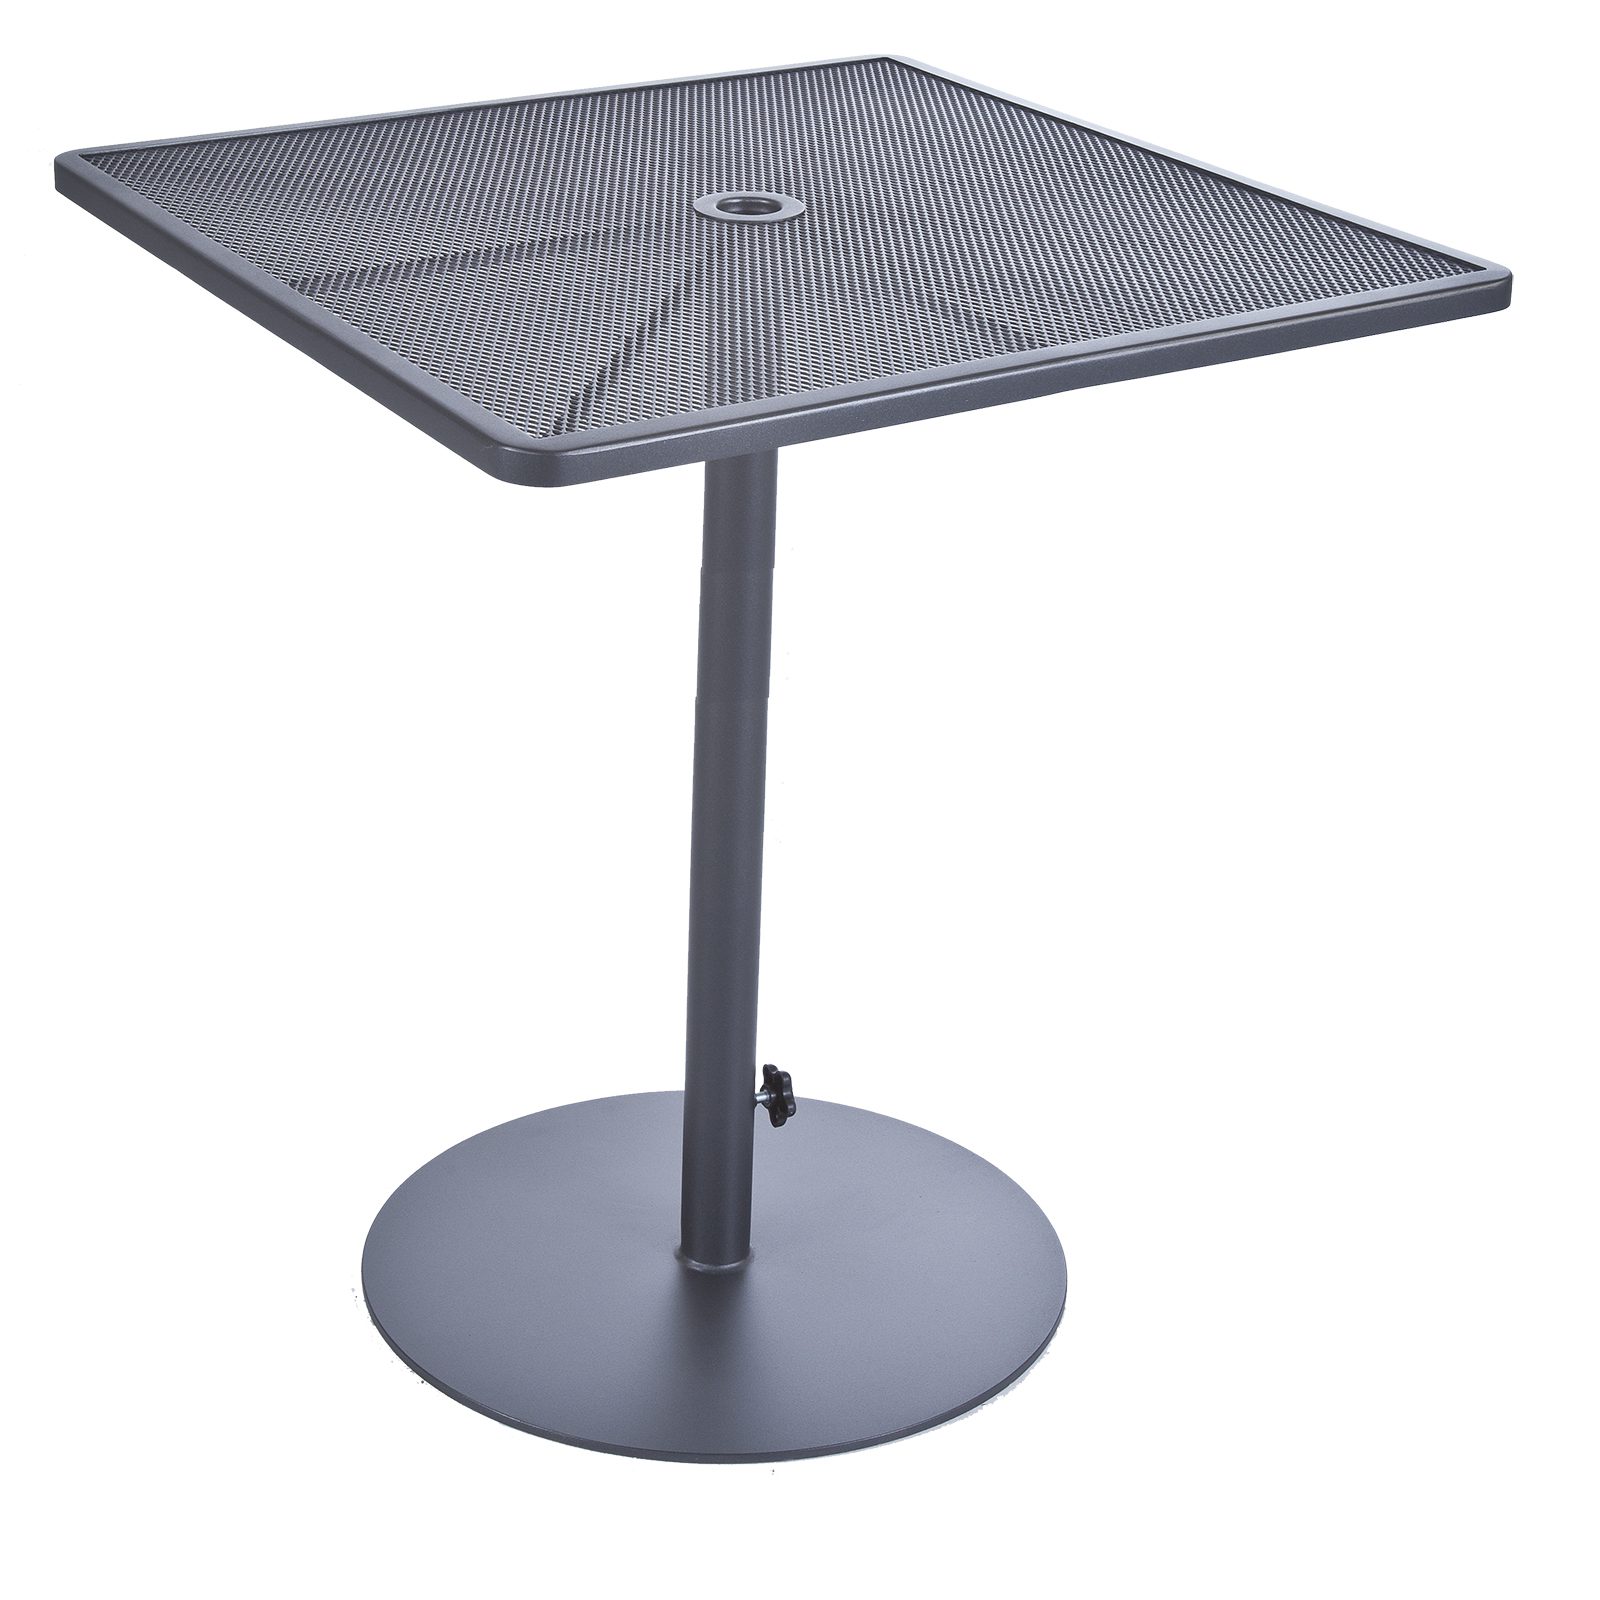 34" Sq. Pedestal Bar Table - Fully Welded Tables - Pedestal Iron Tables 10